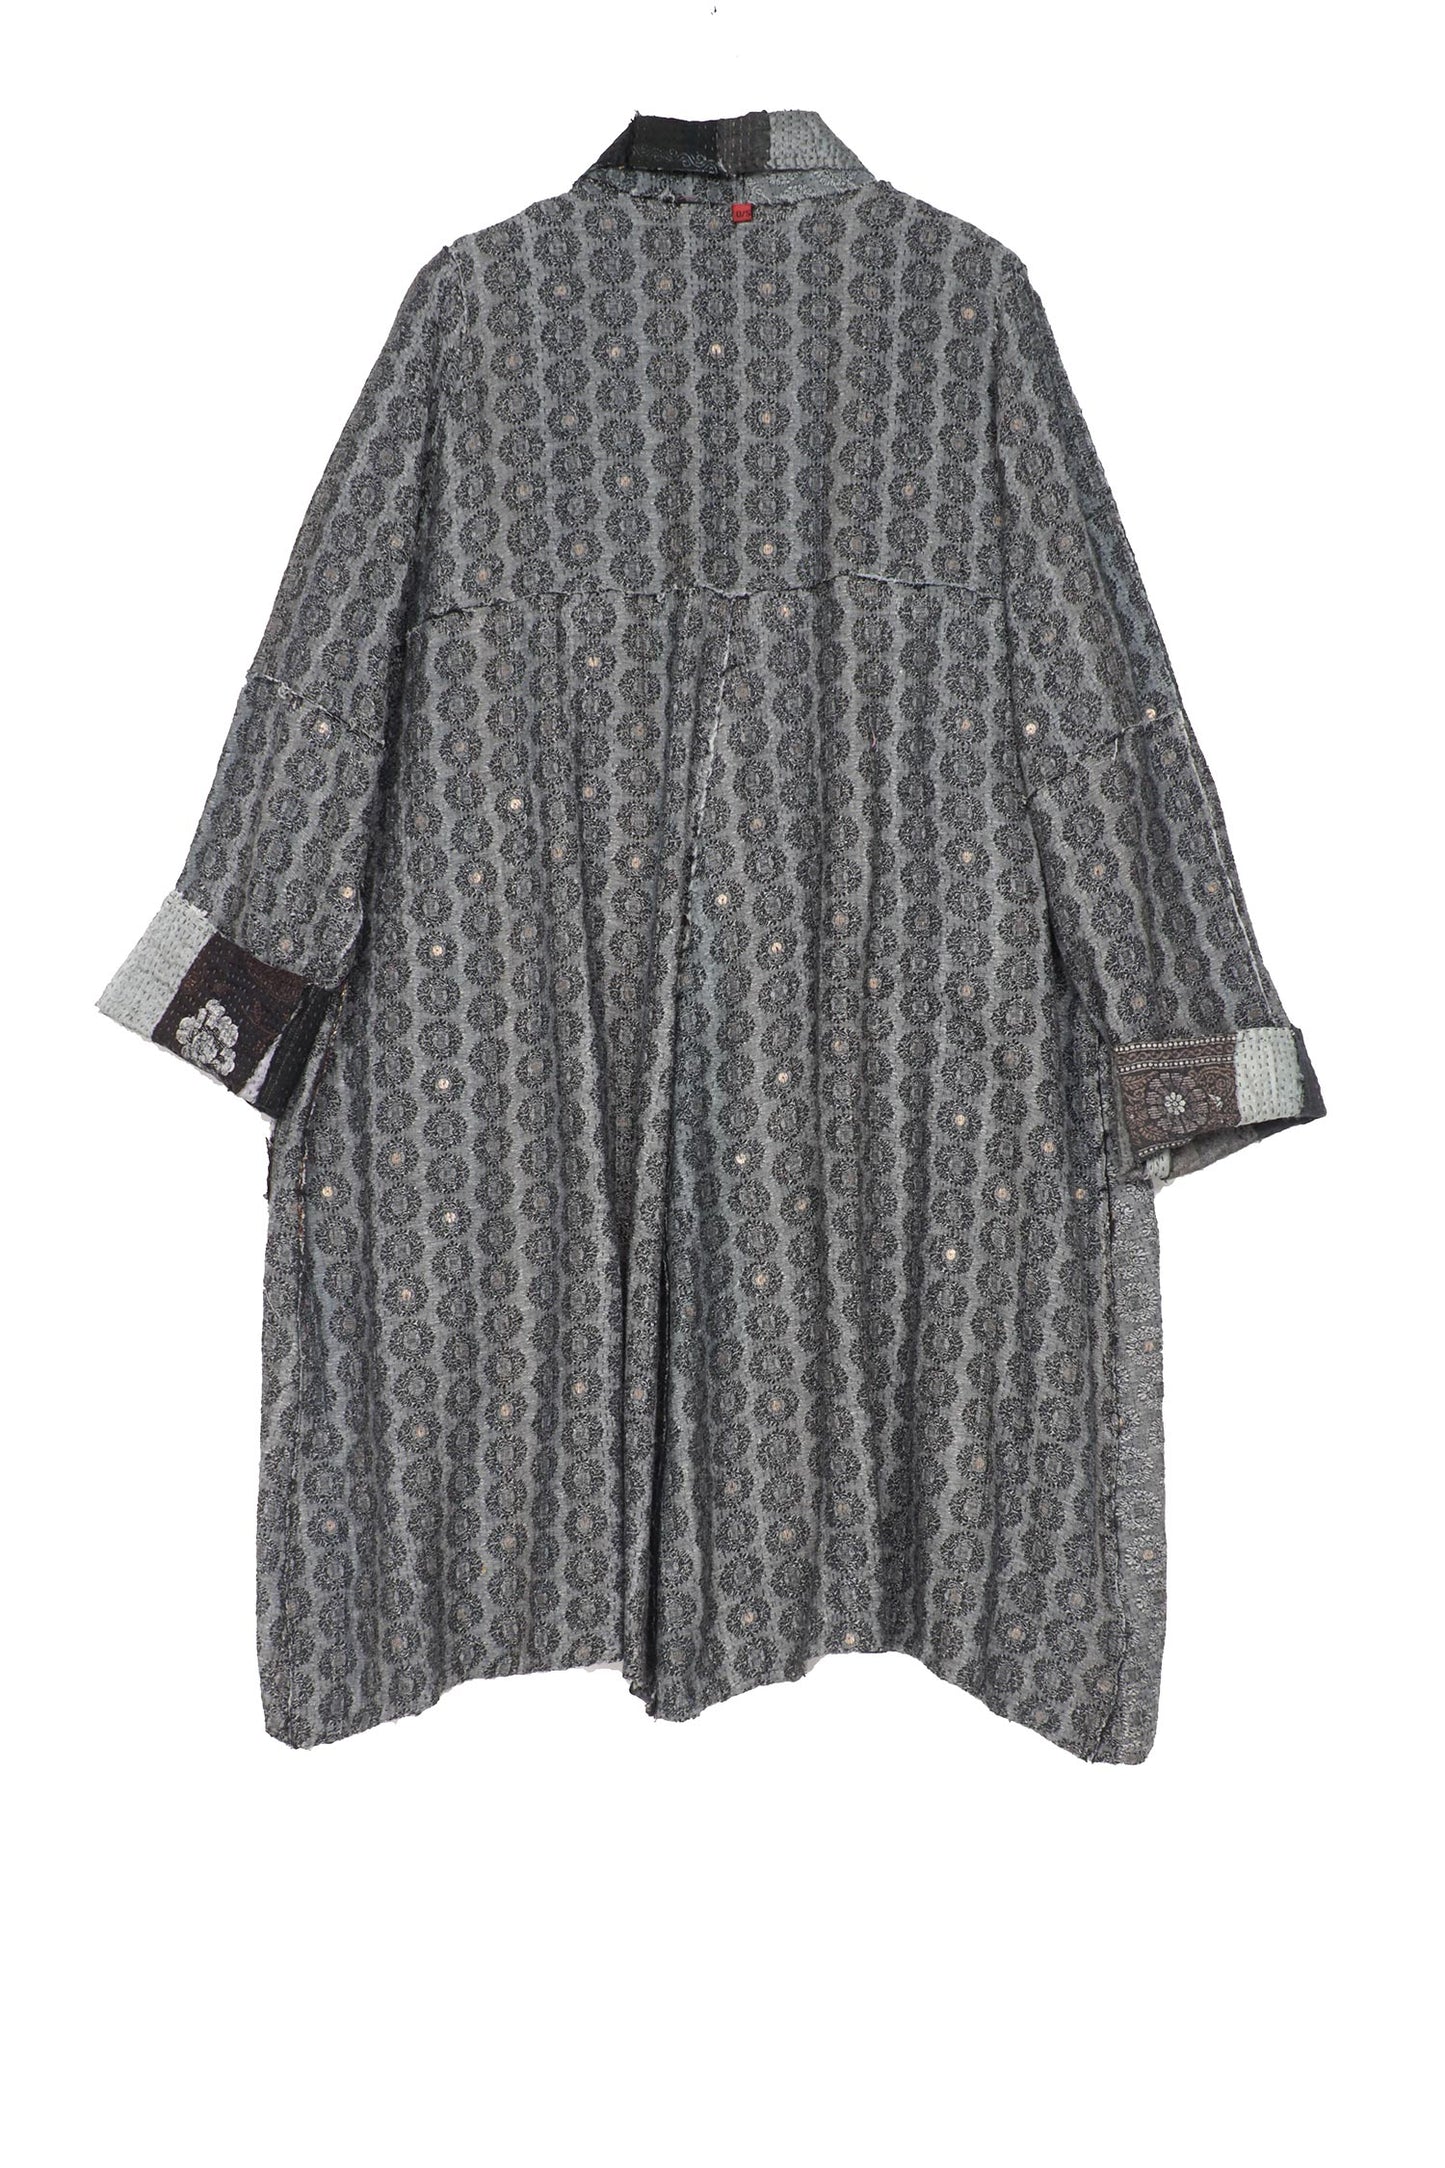 STRIPE FRAYED & HANDWOVEN KANTHA A-LINE DUSTER